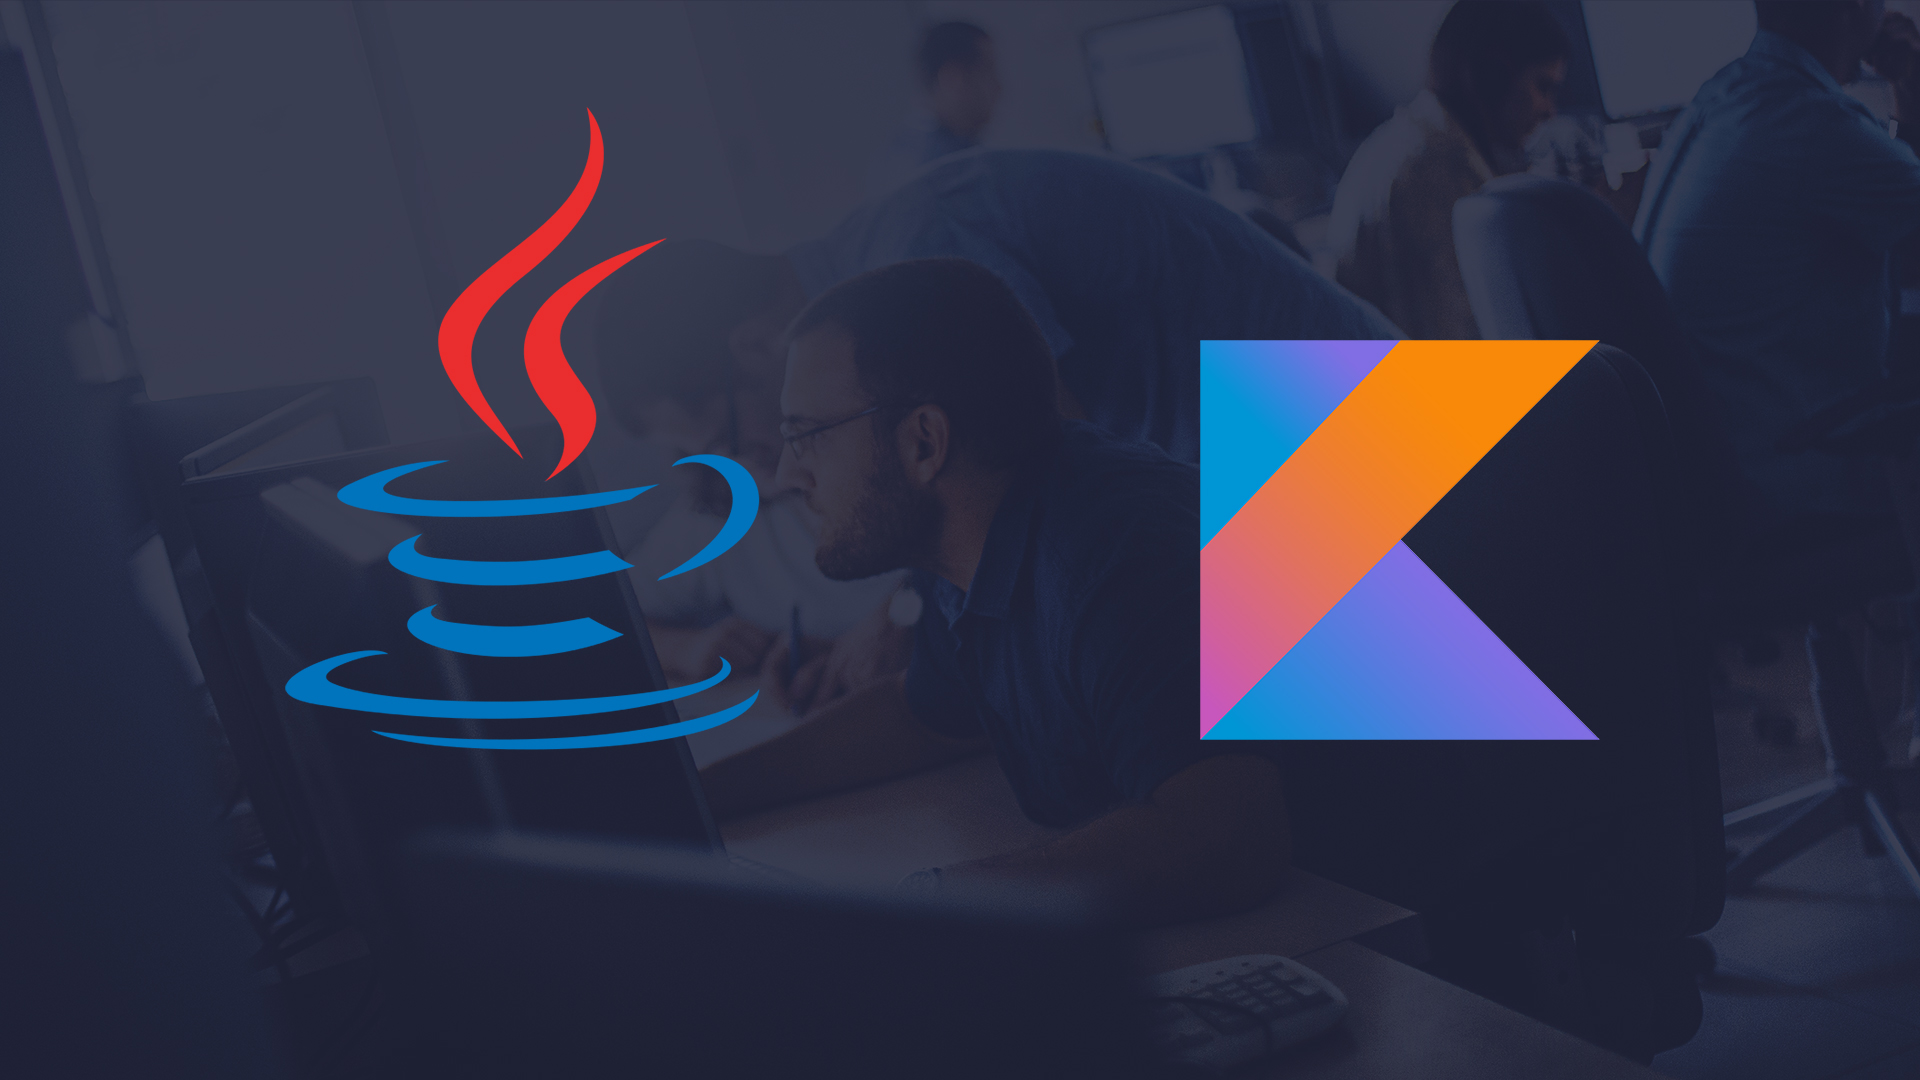 Java VS Kotlin: What Are the Key Differences Between Them?